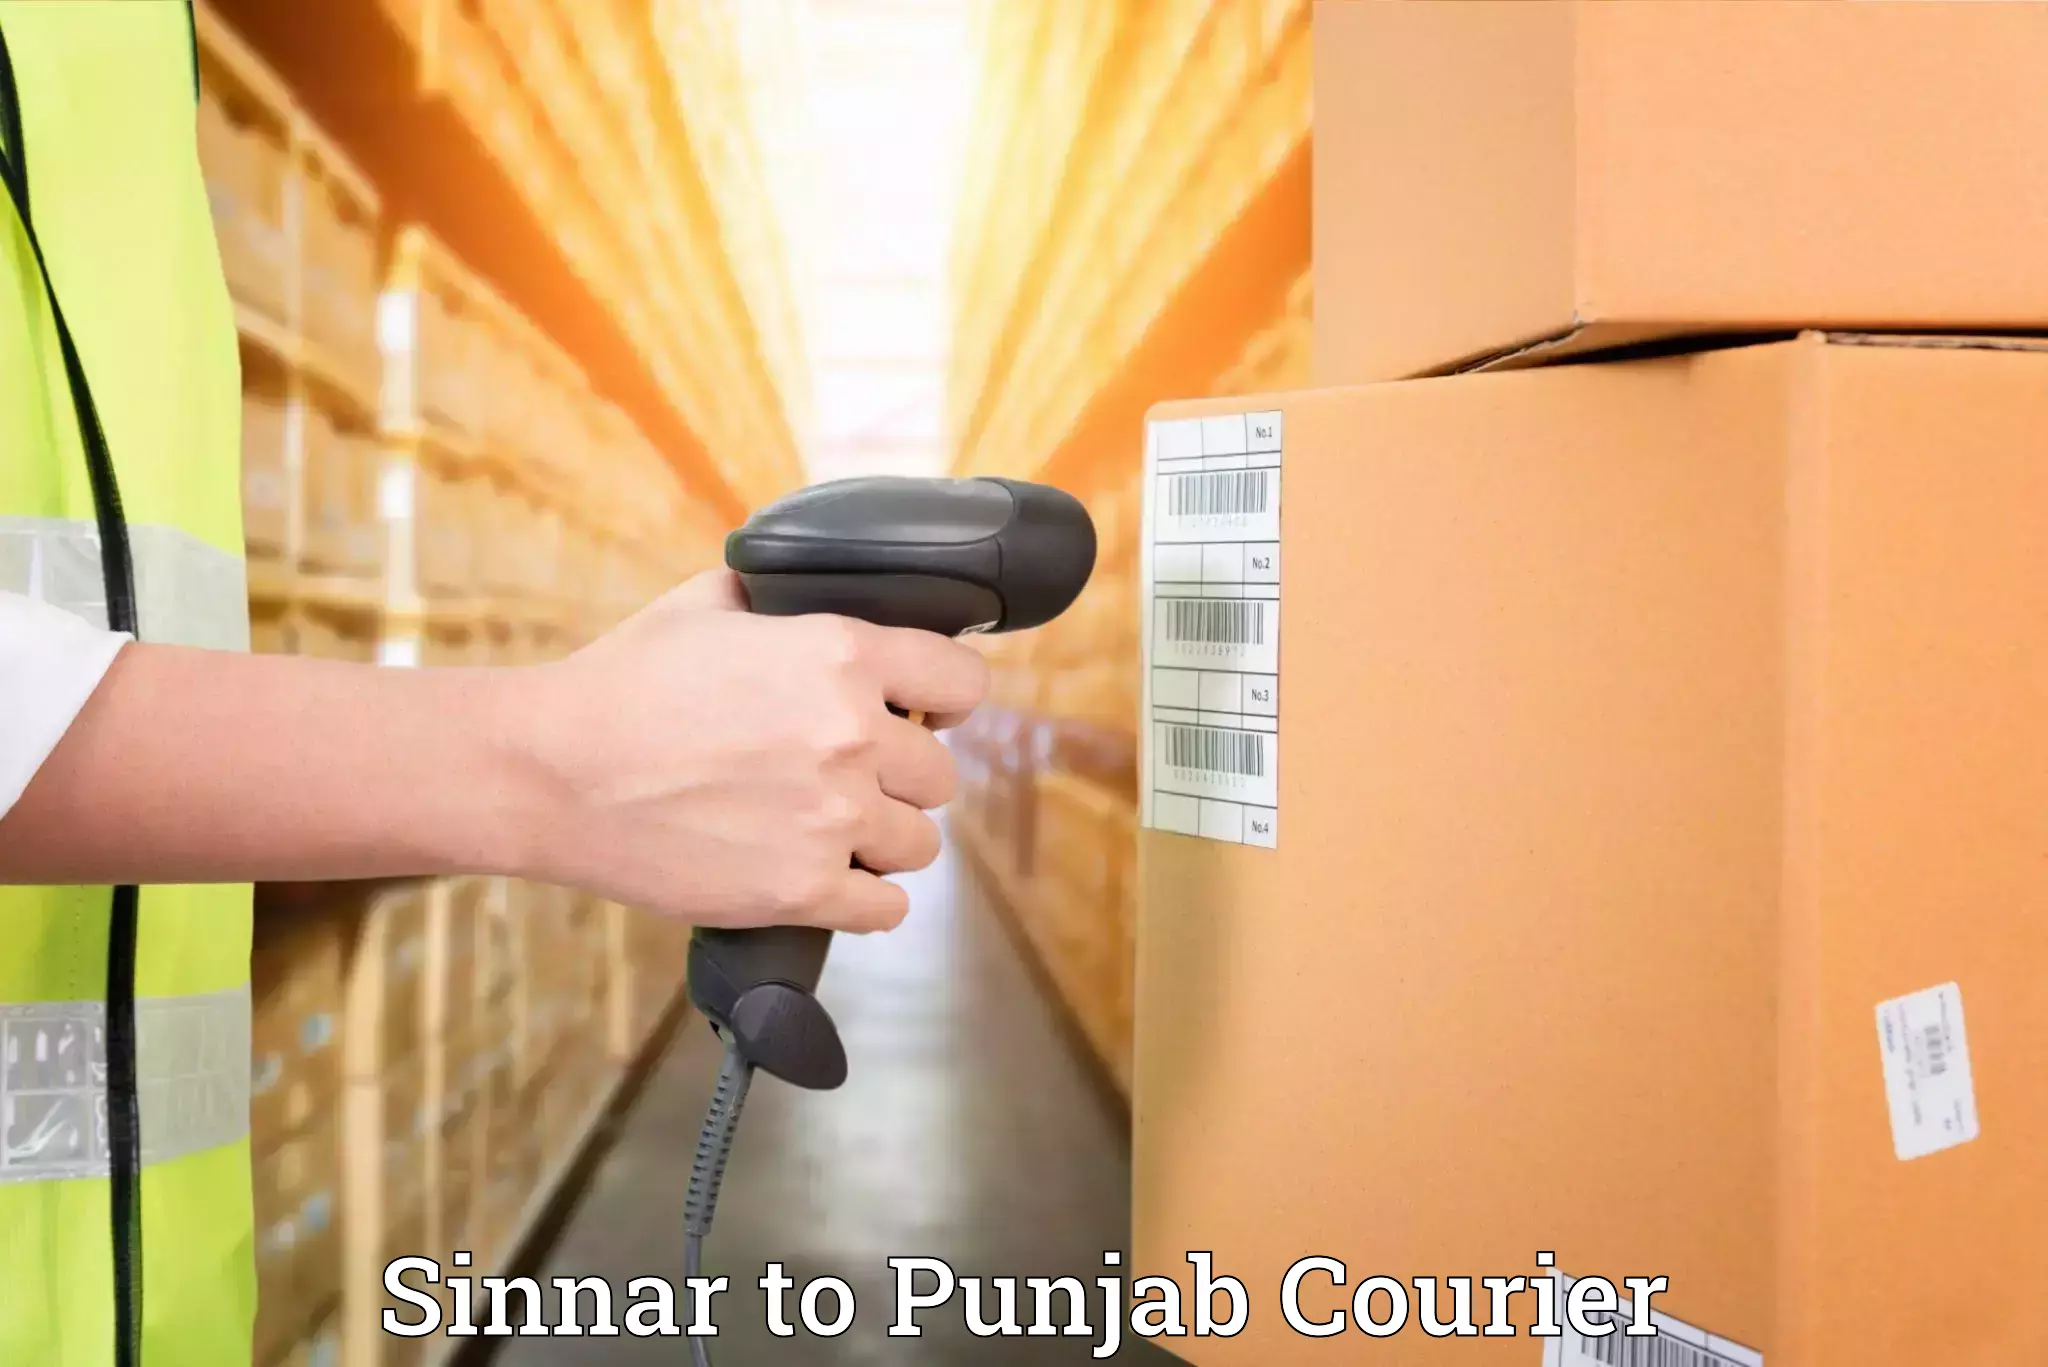 Specialized moving company Sinnar to Punjab